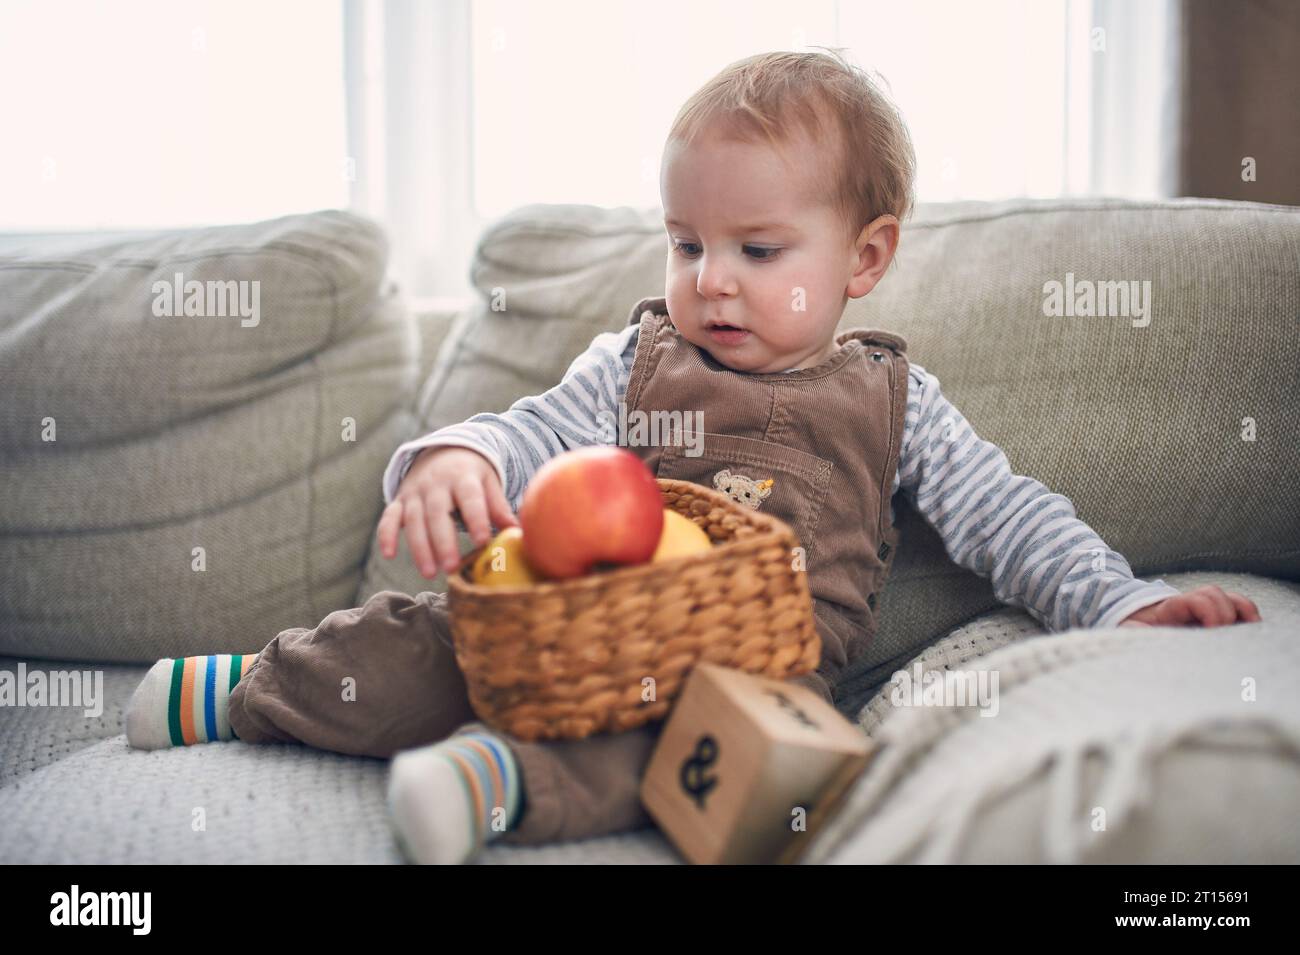 Portrait of a cute 1 year old baby boy sitting on a sofa. Stock Photo